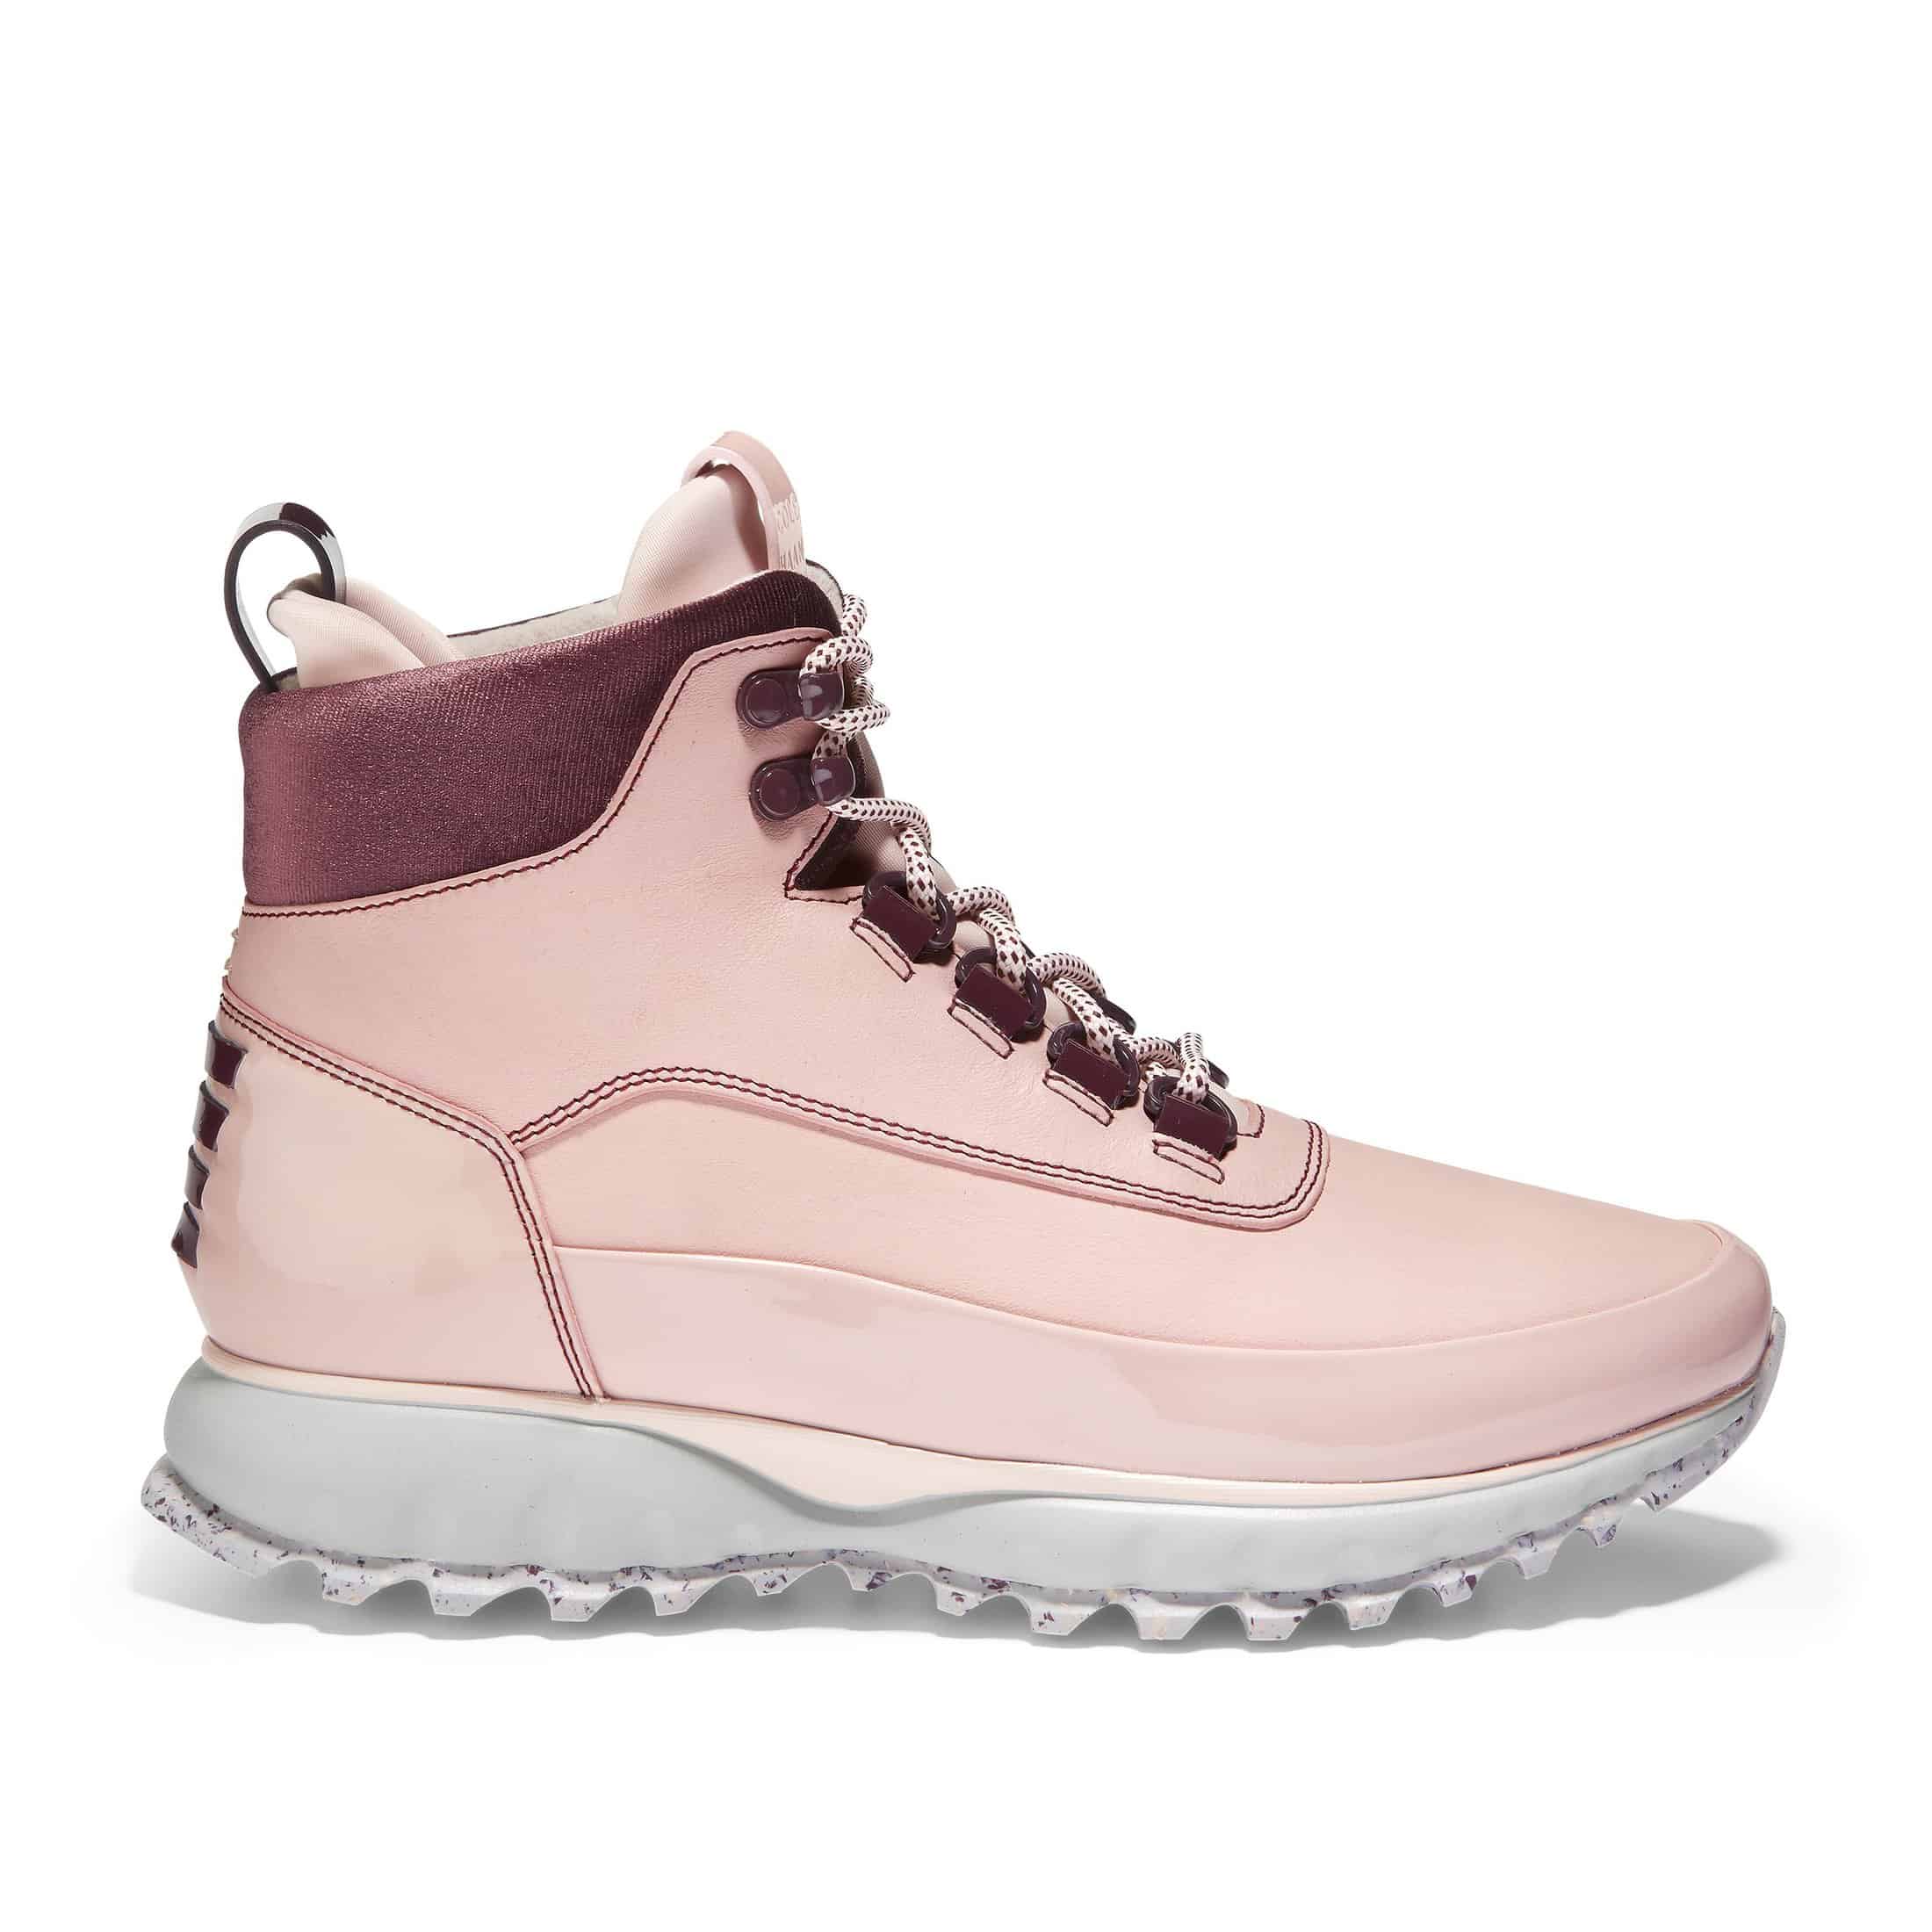 Cole Haan x Karla Welch Hiking Boots